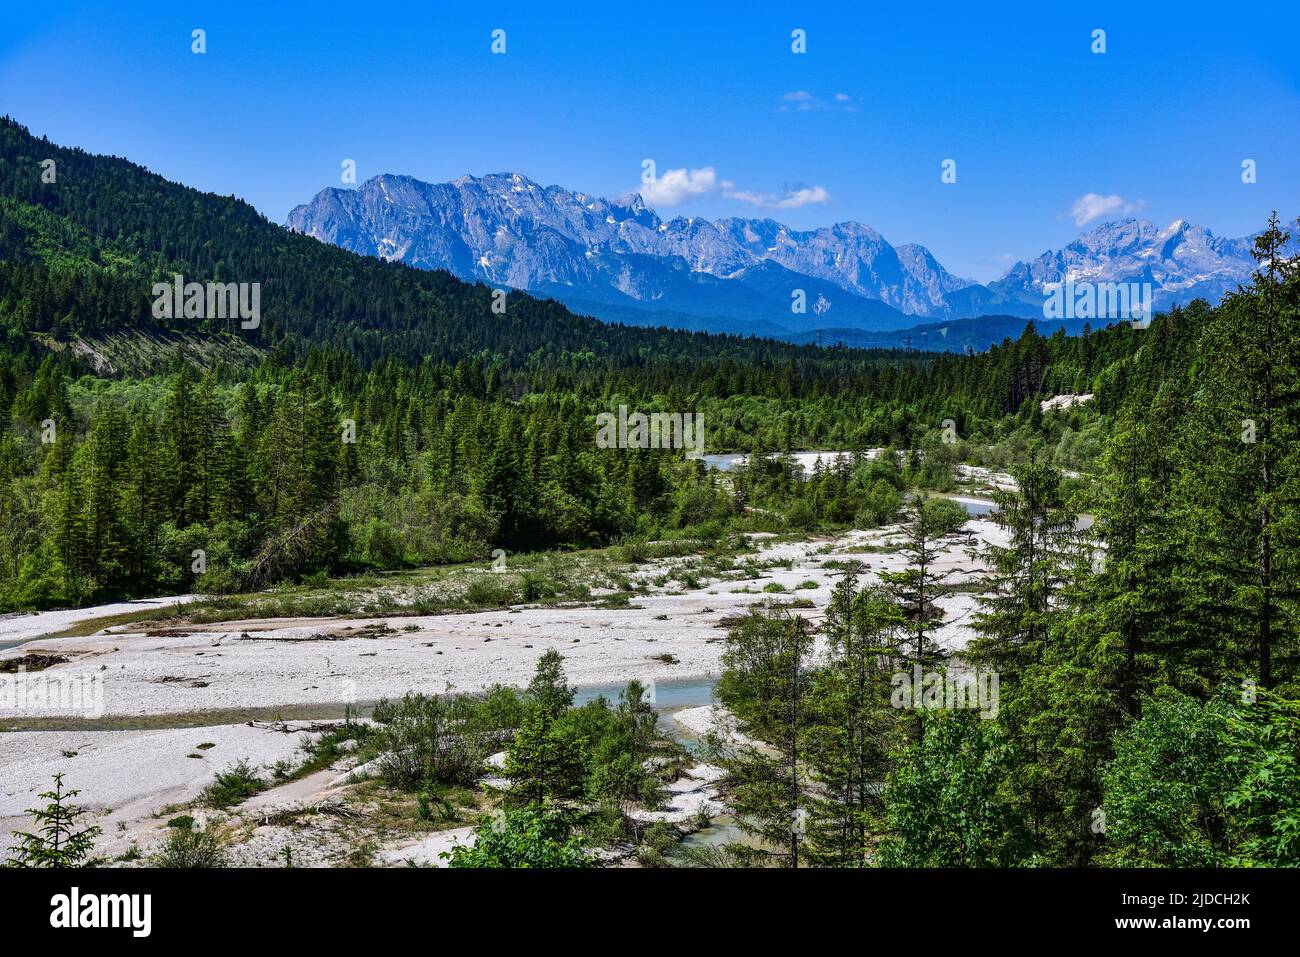 On the upper reaches of the Isar between Vorderriss and Wallgau, view of the Wetterstein Mountains, district of Bad Tölz-Wolfratshausen, Bavaria, Germ Stock Photo